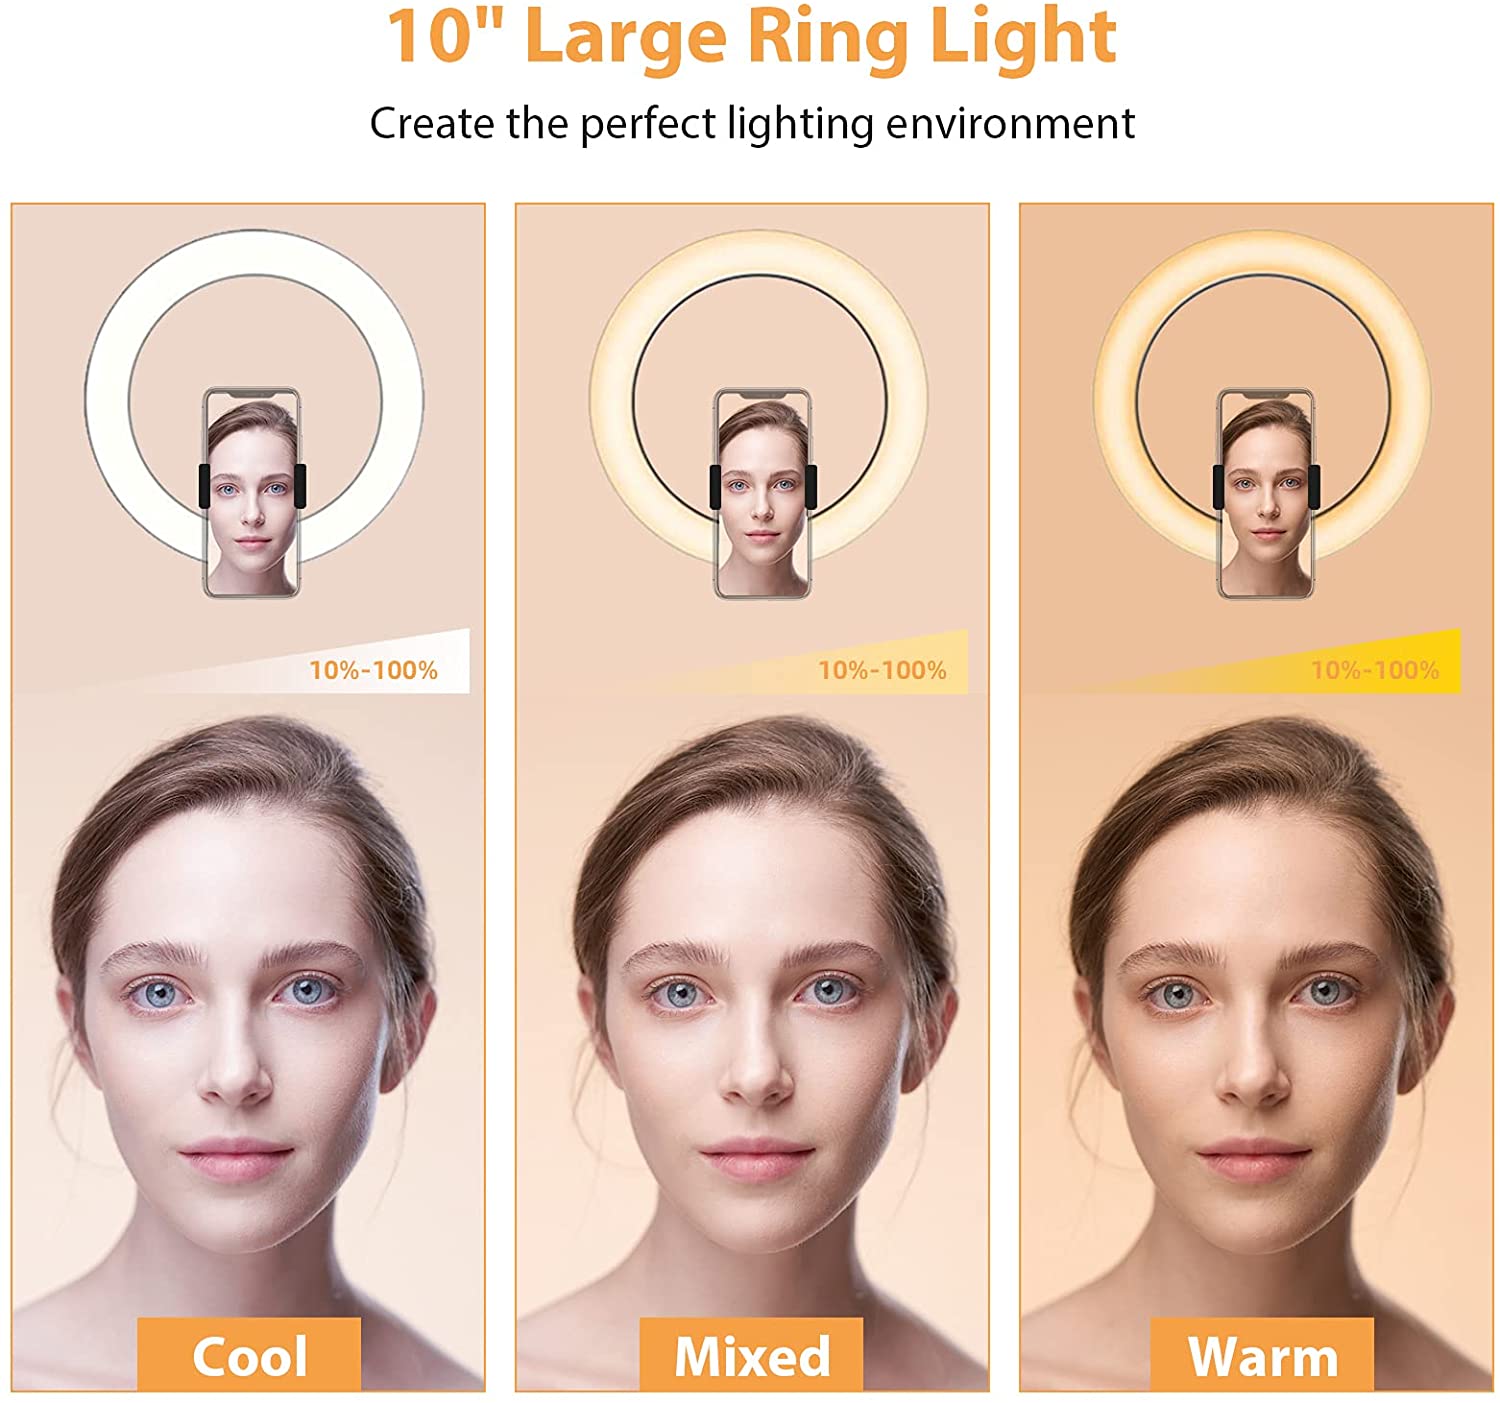 The 10'' ring light with three light adjustments and brightness control can show changes in facial brightness.